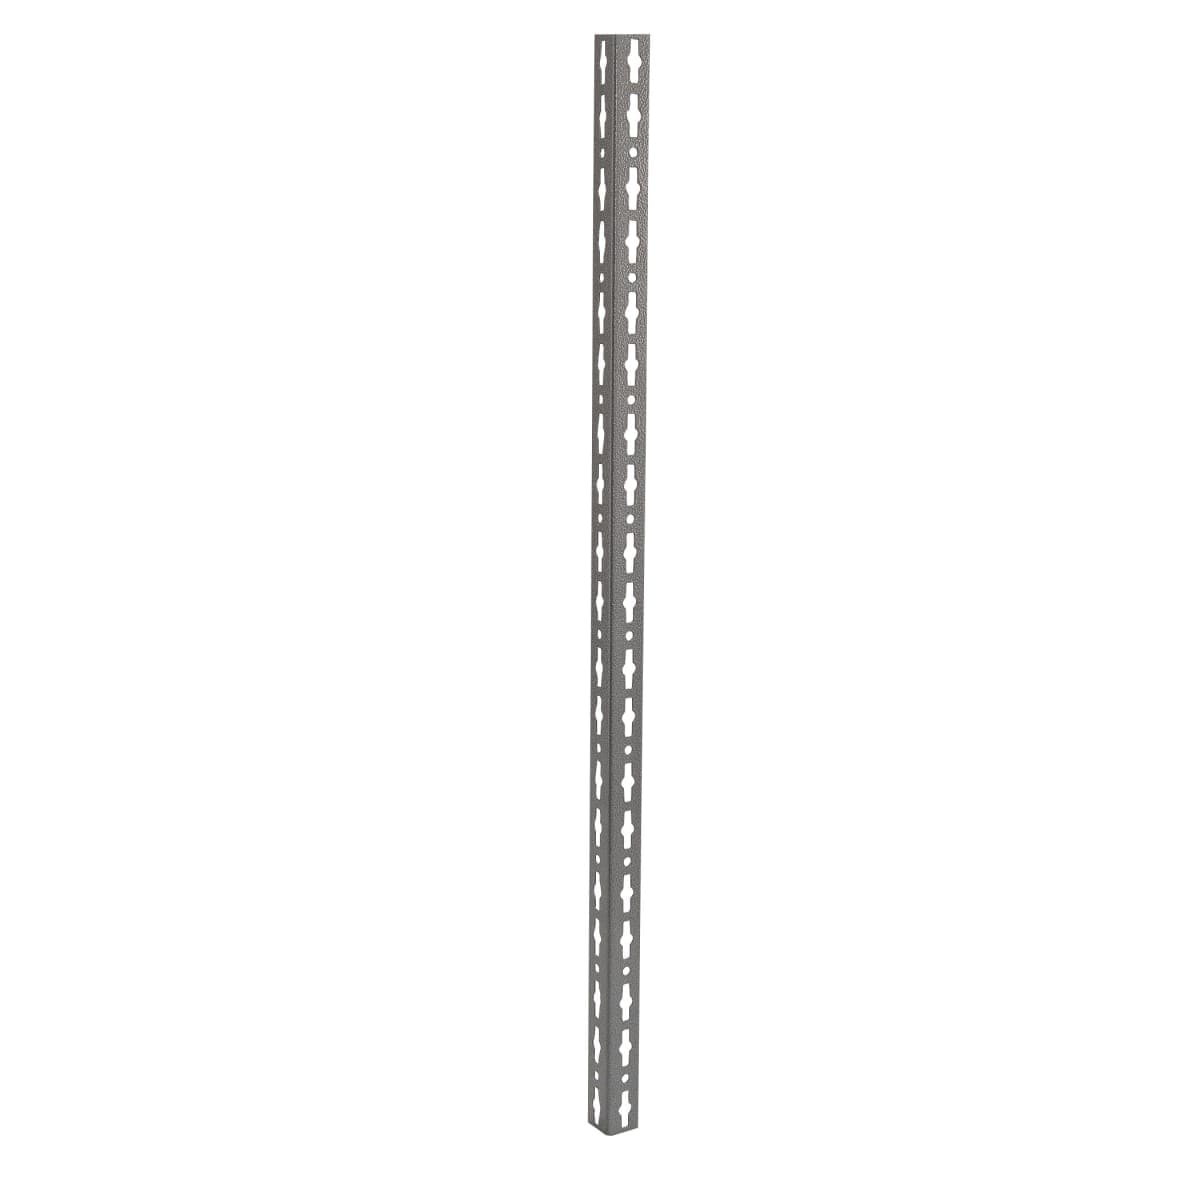 METAL BOLT MOUNTING L4xW4xH200CM GREY WITH BOLTS - best price from Maltashopper.com BR410000975